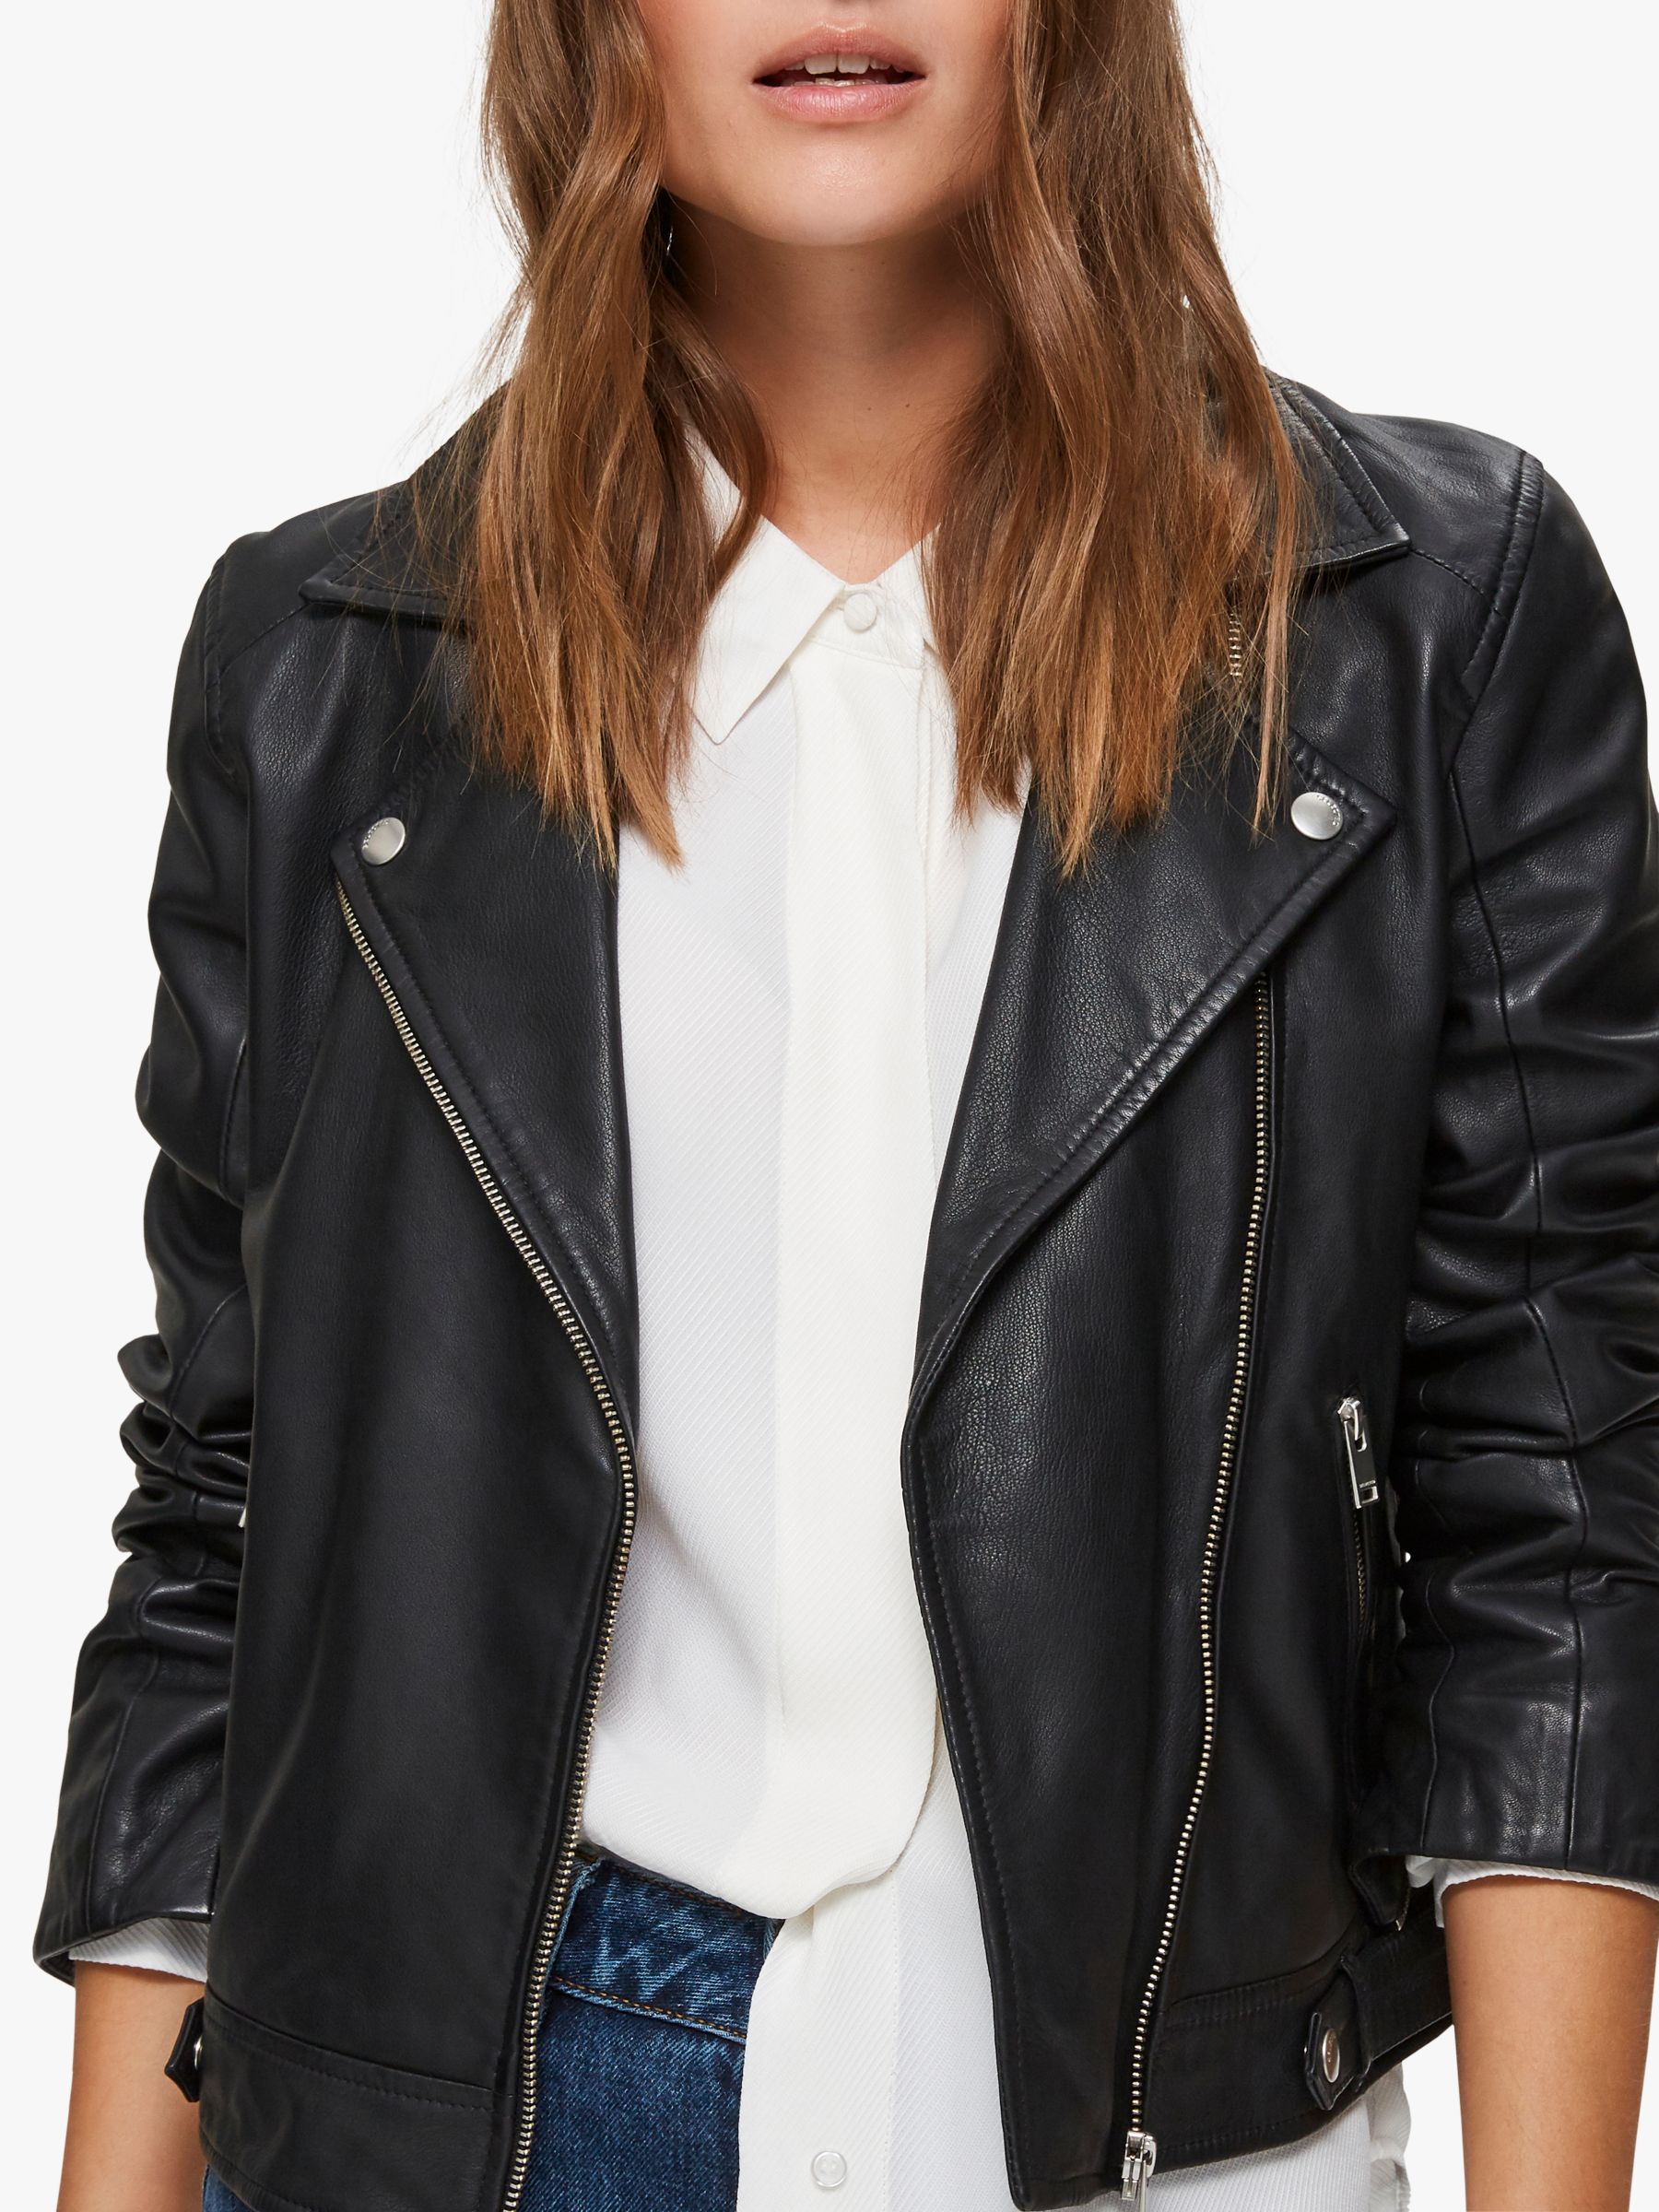 Selected Femme Katie Leather Jacket